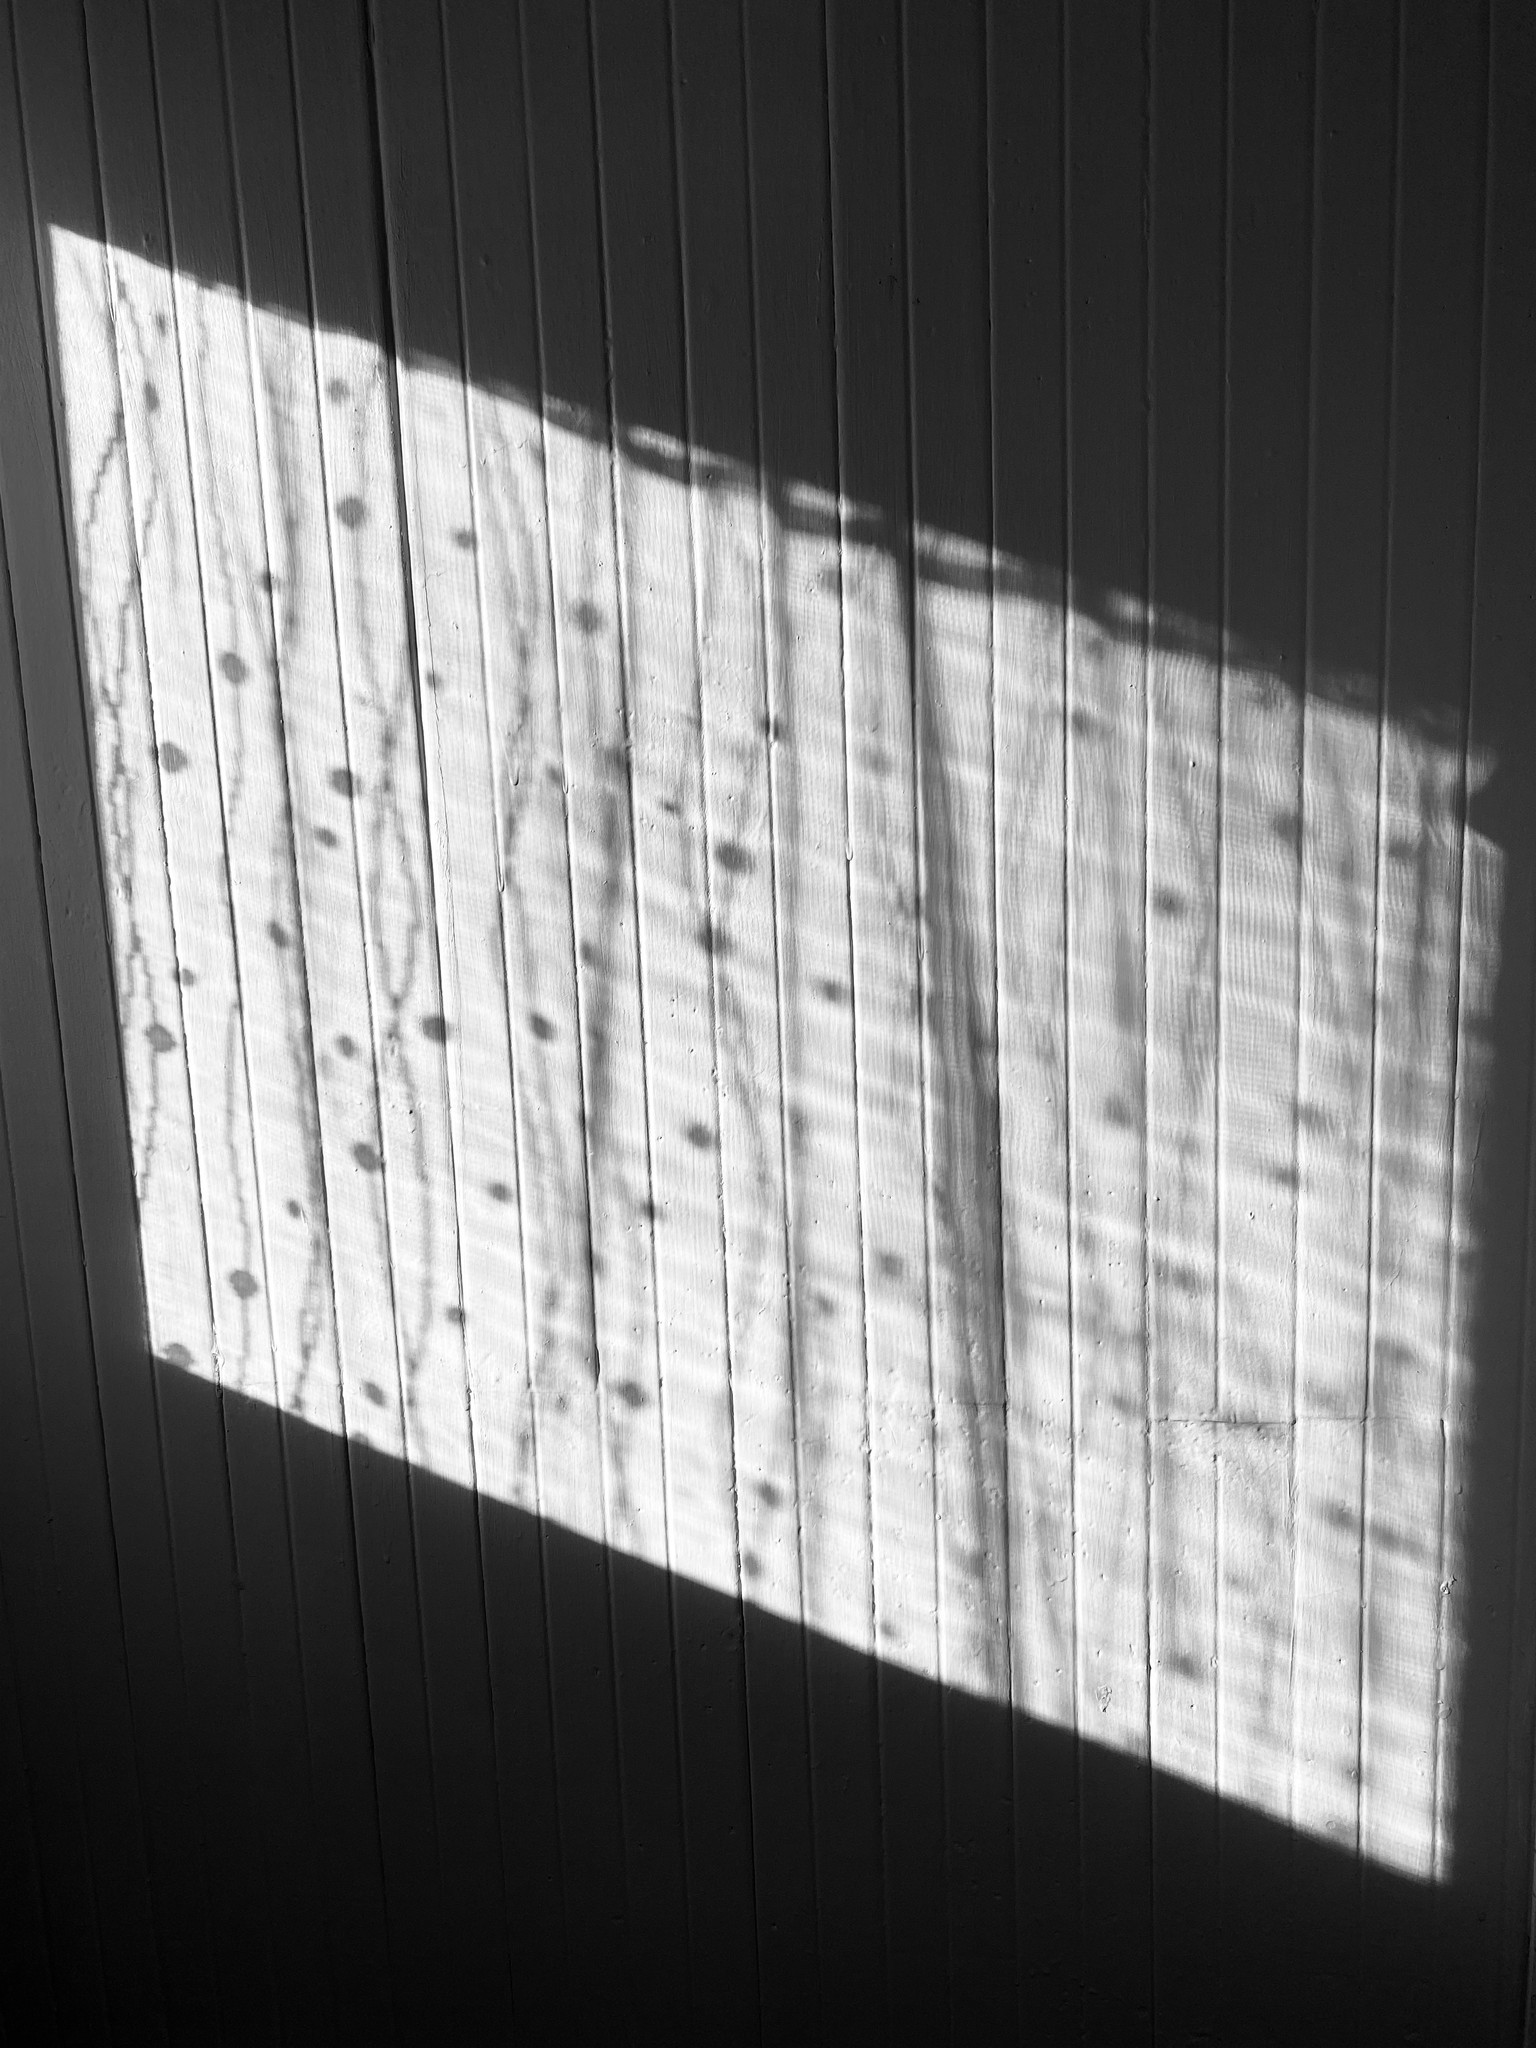 Light peeking through window and showing up on wall with shadows